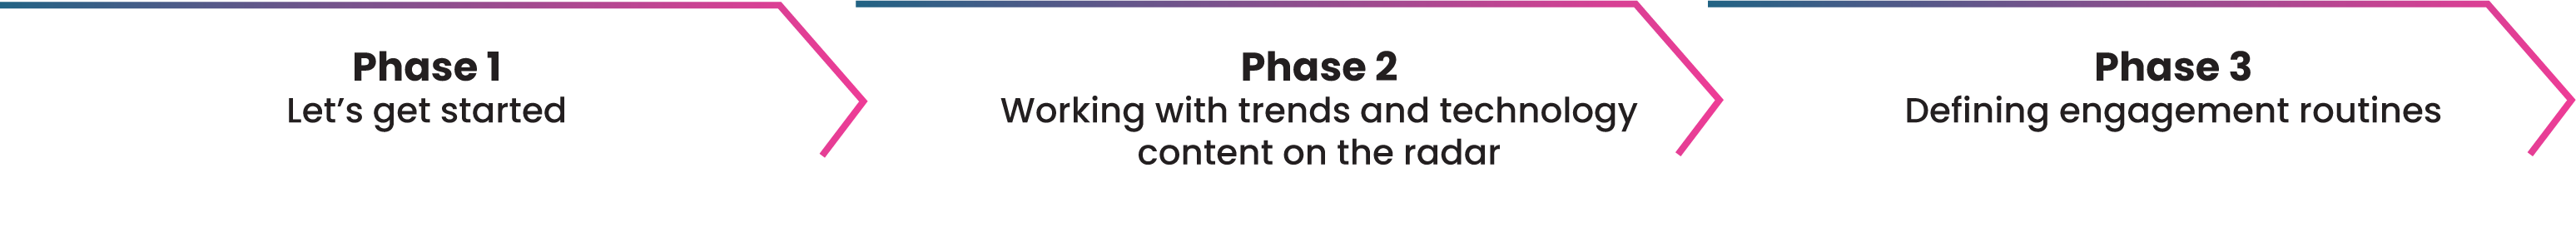 Cloud-Onboarding-Phases